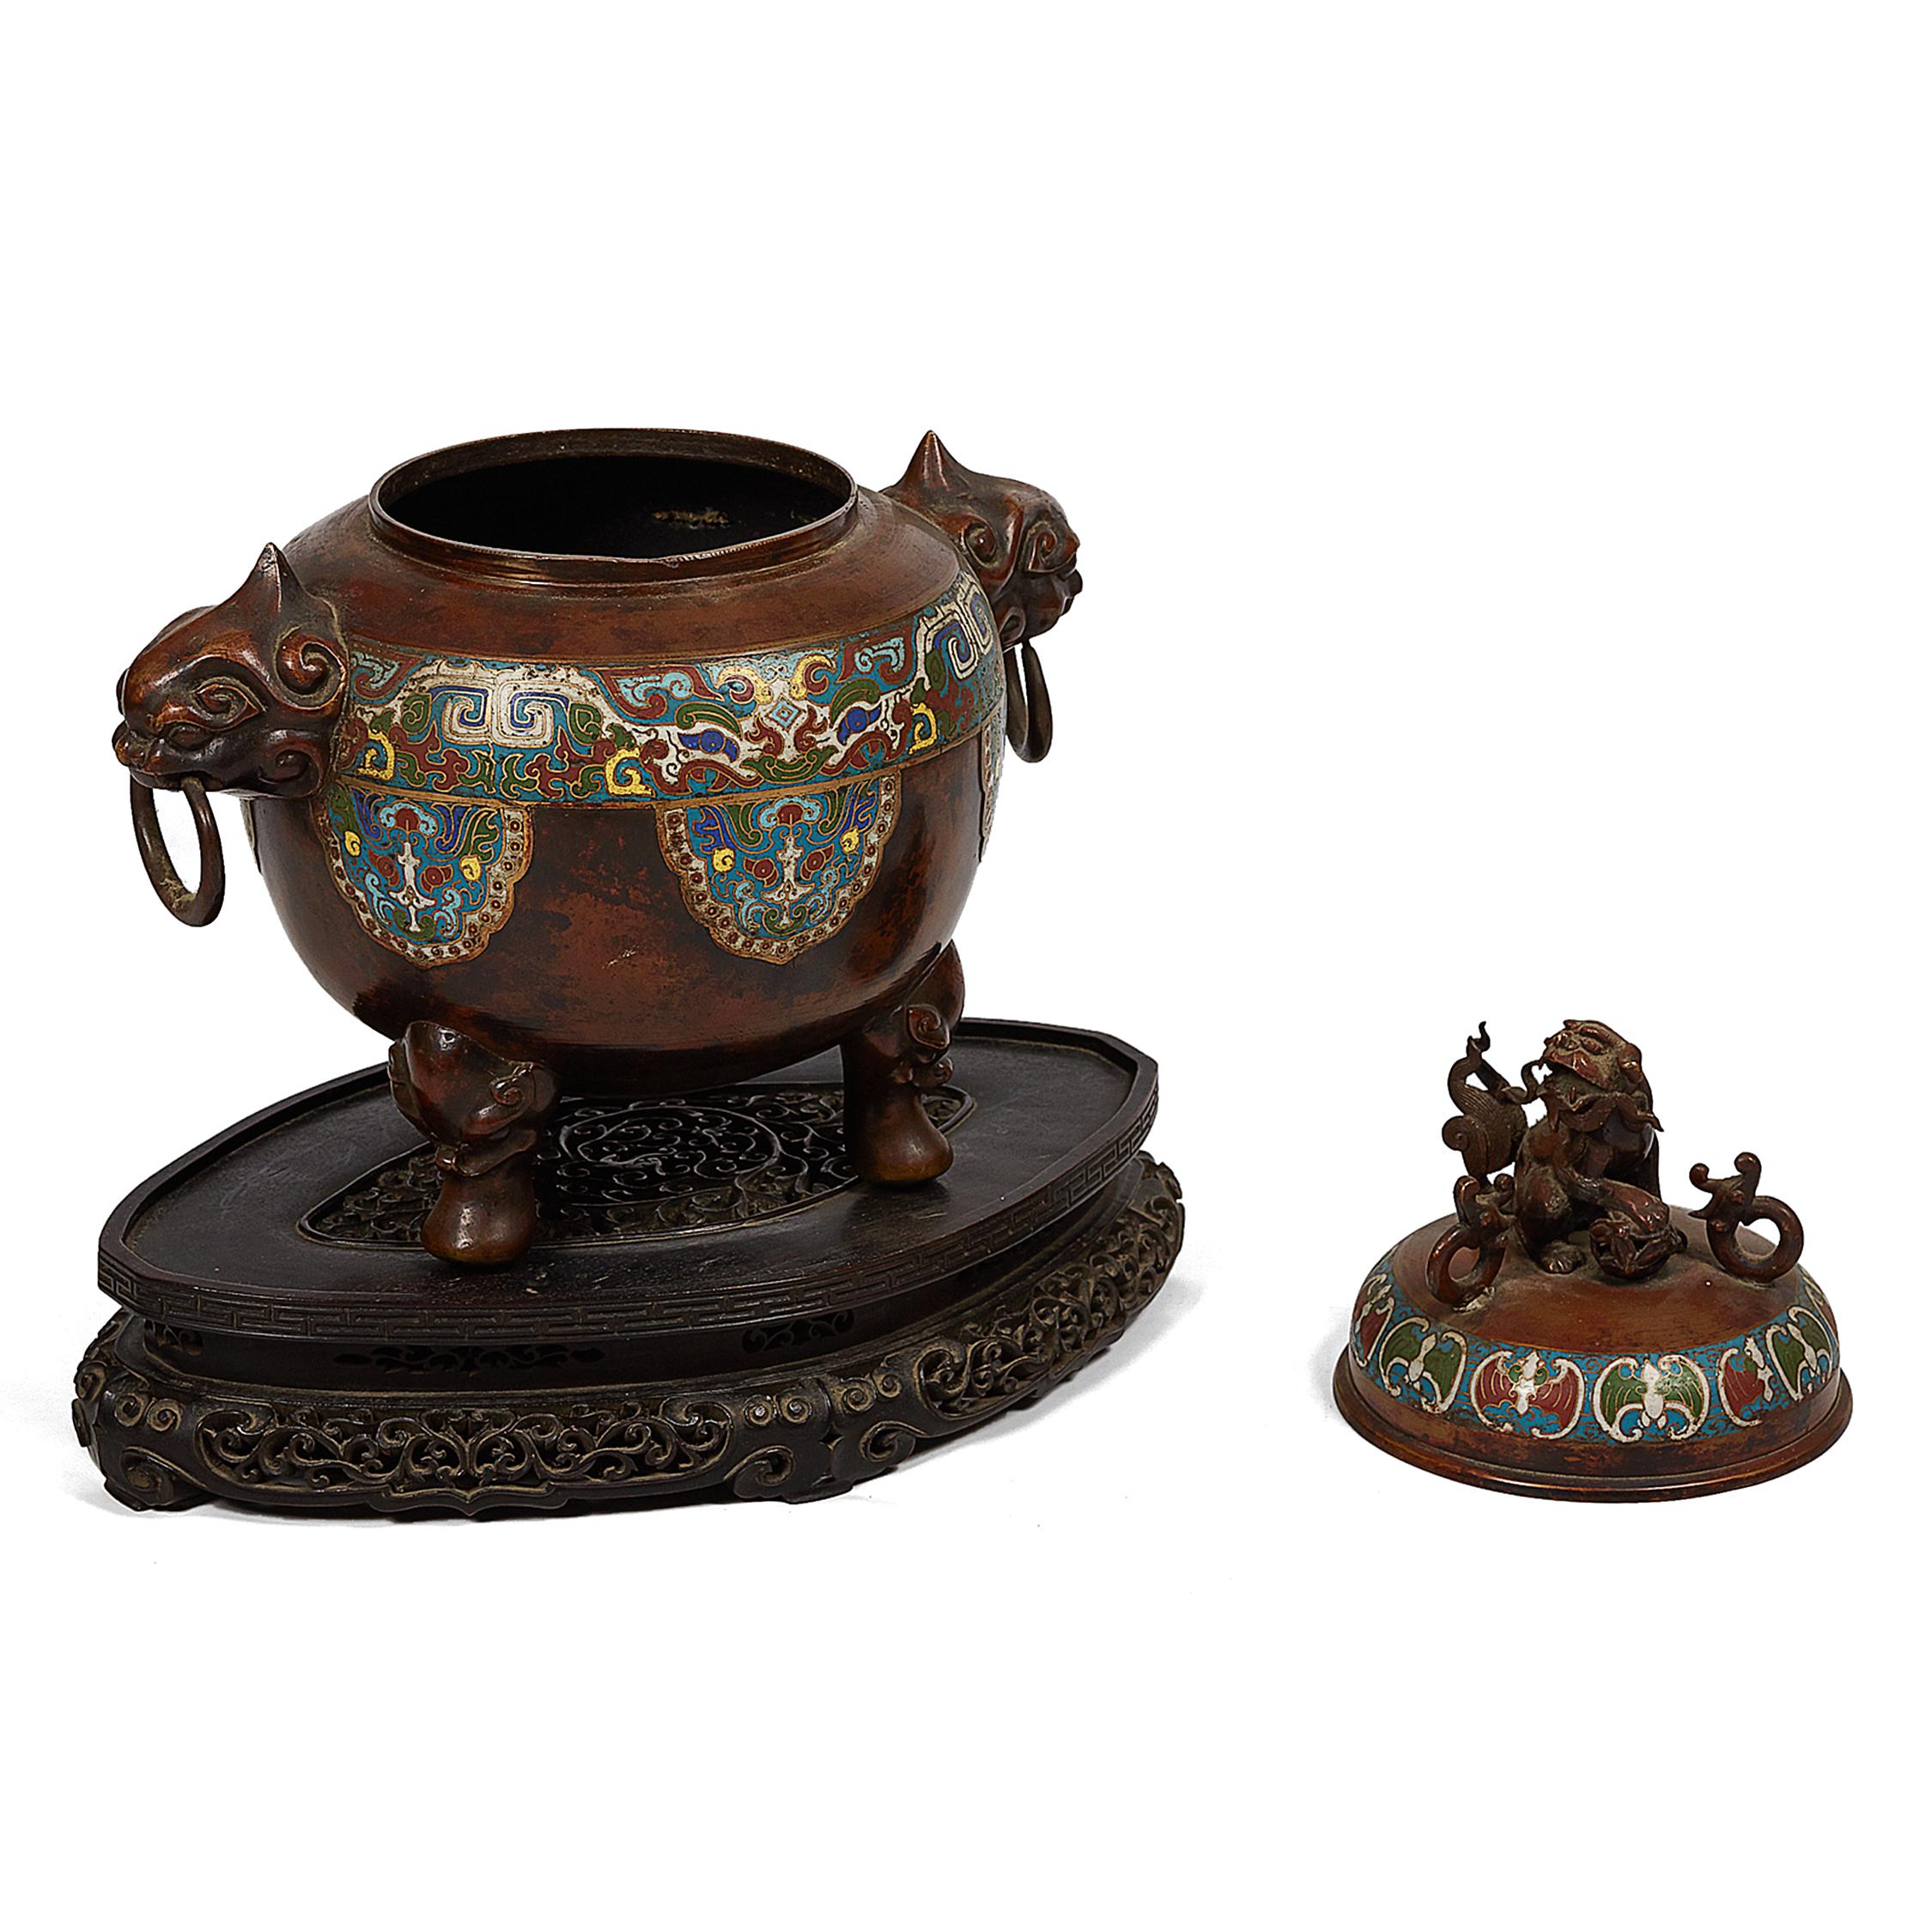 This Japanese censer incense burner, inspired by Chinese pieces, is of spheroidal form, the bronze body with polychrome champlevé enamel work flanked by dragon-head handles and ring pulls. The lid with a decorative polychrome champlevé enameled band